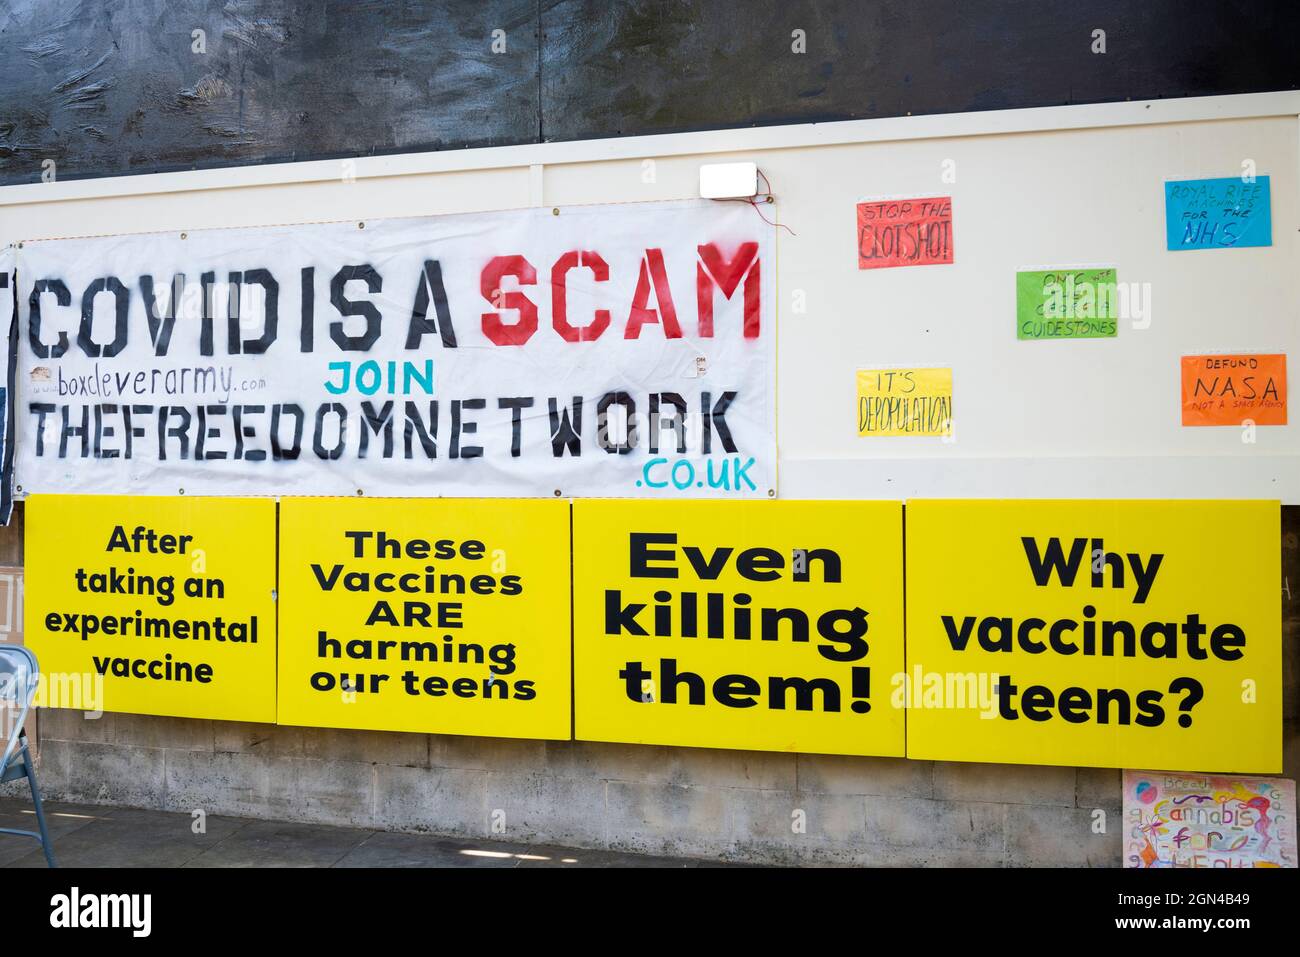 COVID hoax banner, sign. Covid is a scam. The freedom network. Box clever army. COVID 19, Coronavirus scam messages in protest Stock Photo